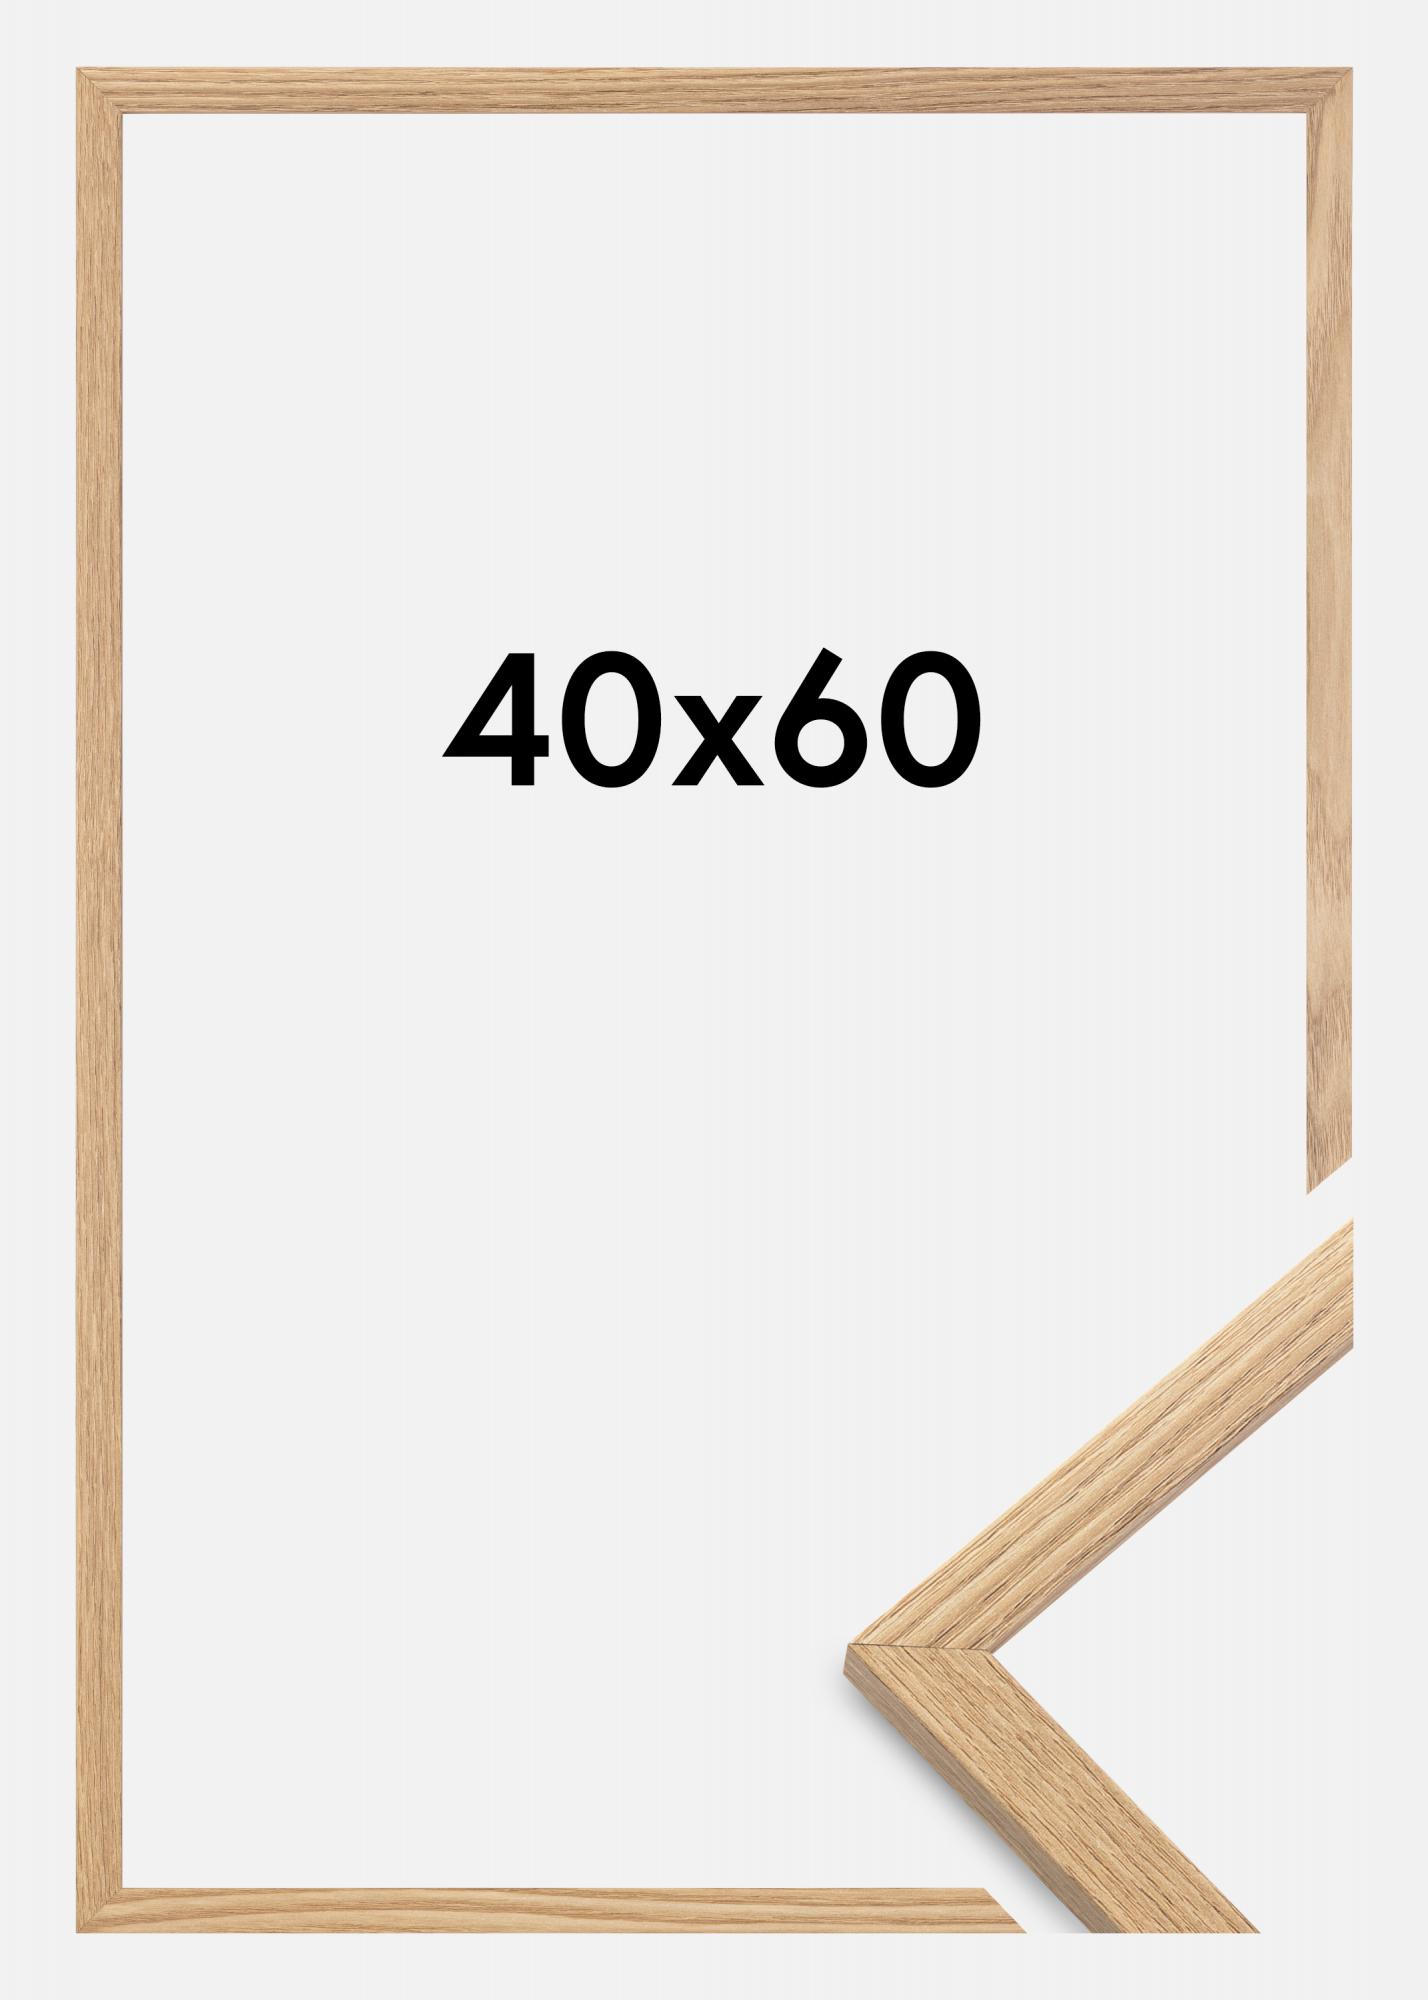 40 x 60 cm picture frame